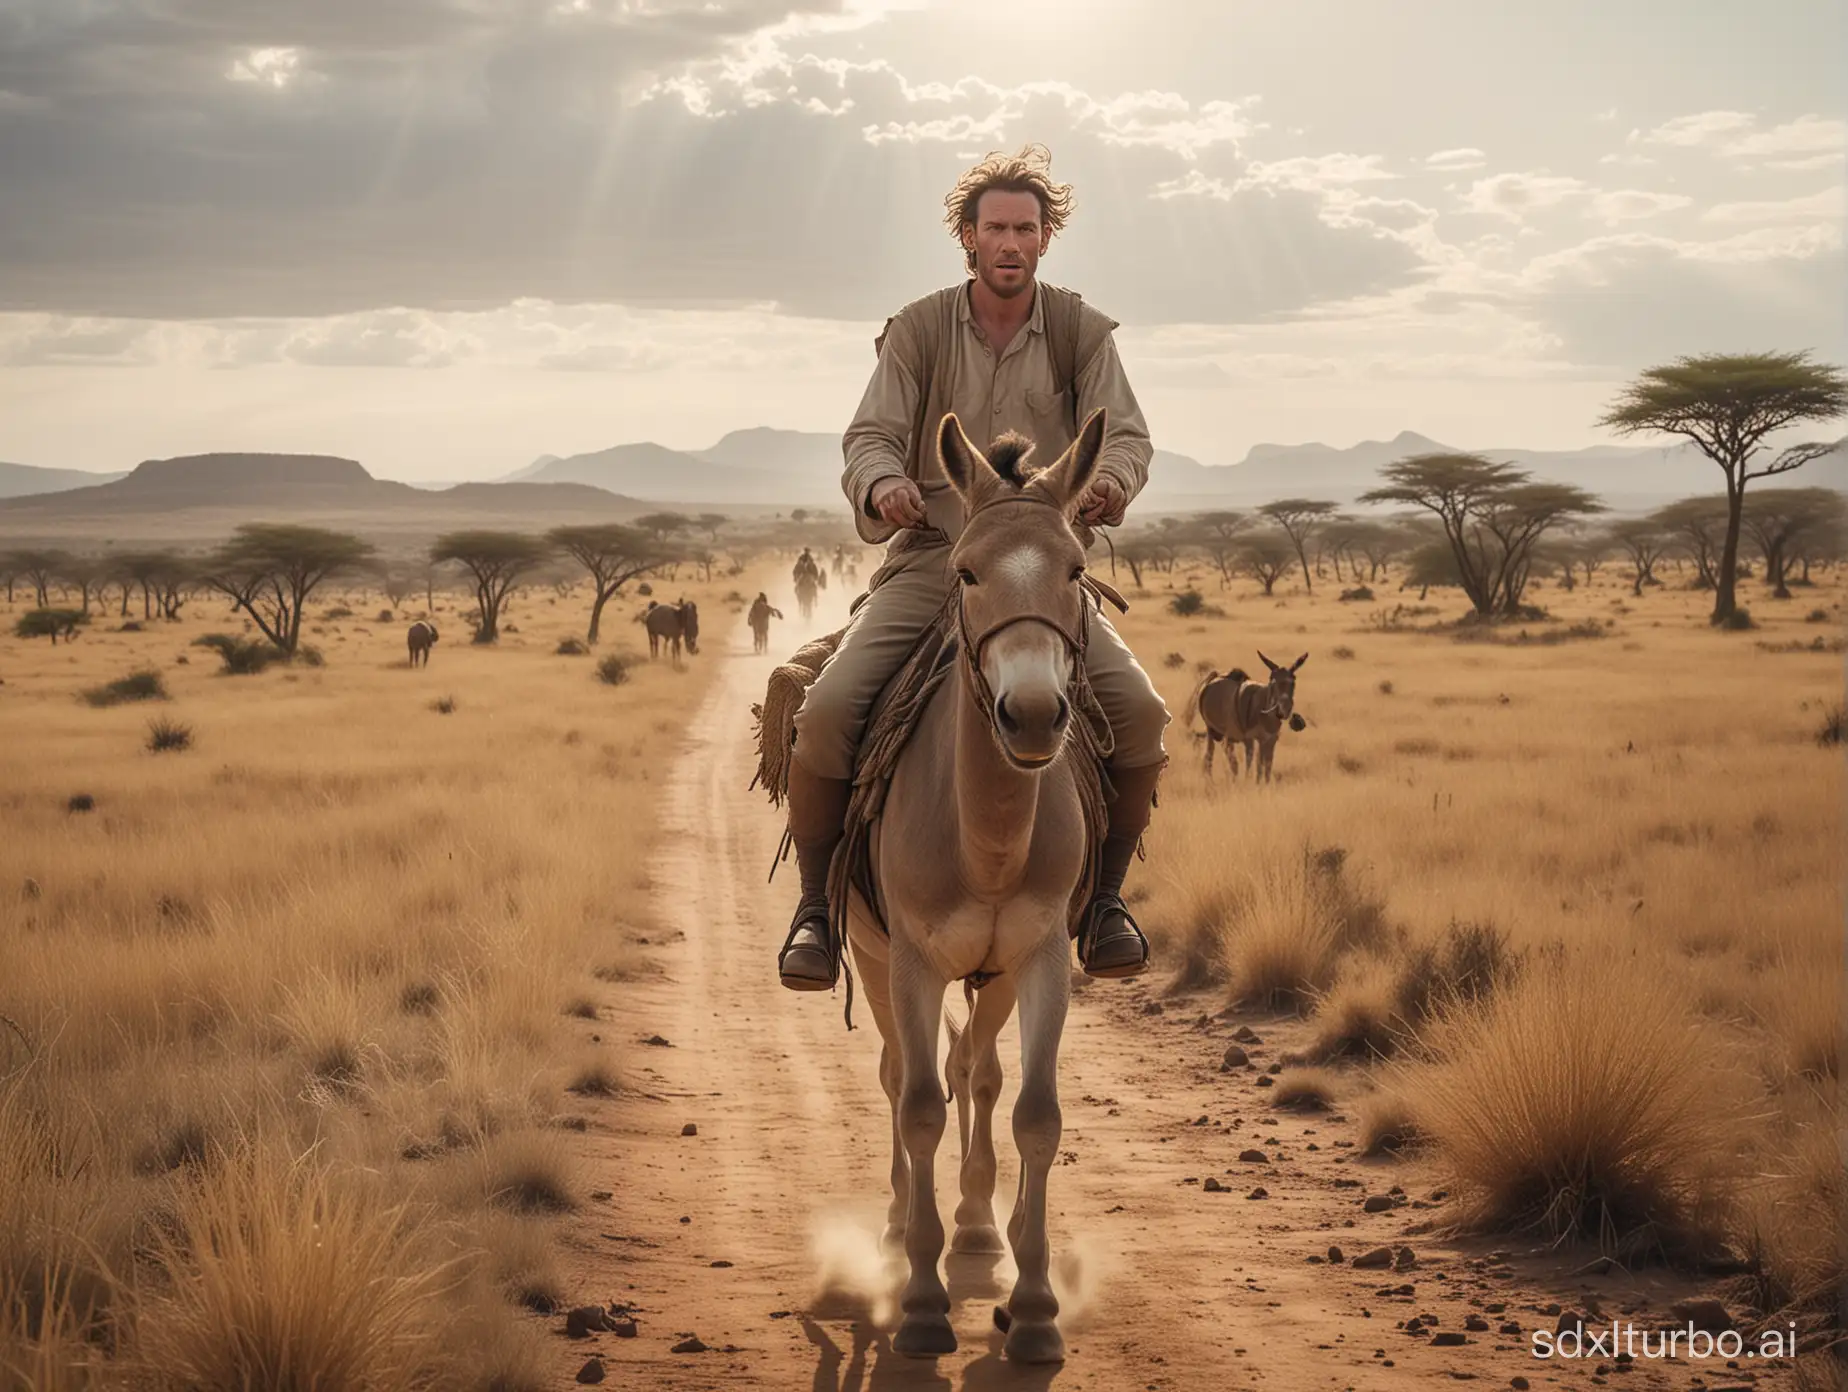 Cinematic image of a white man riding his donkey through the African plains. Both the donkey and man are facing the camera